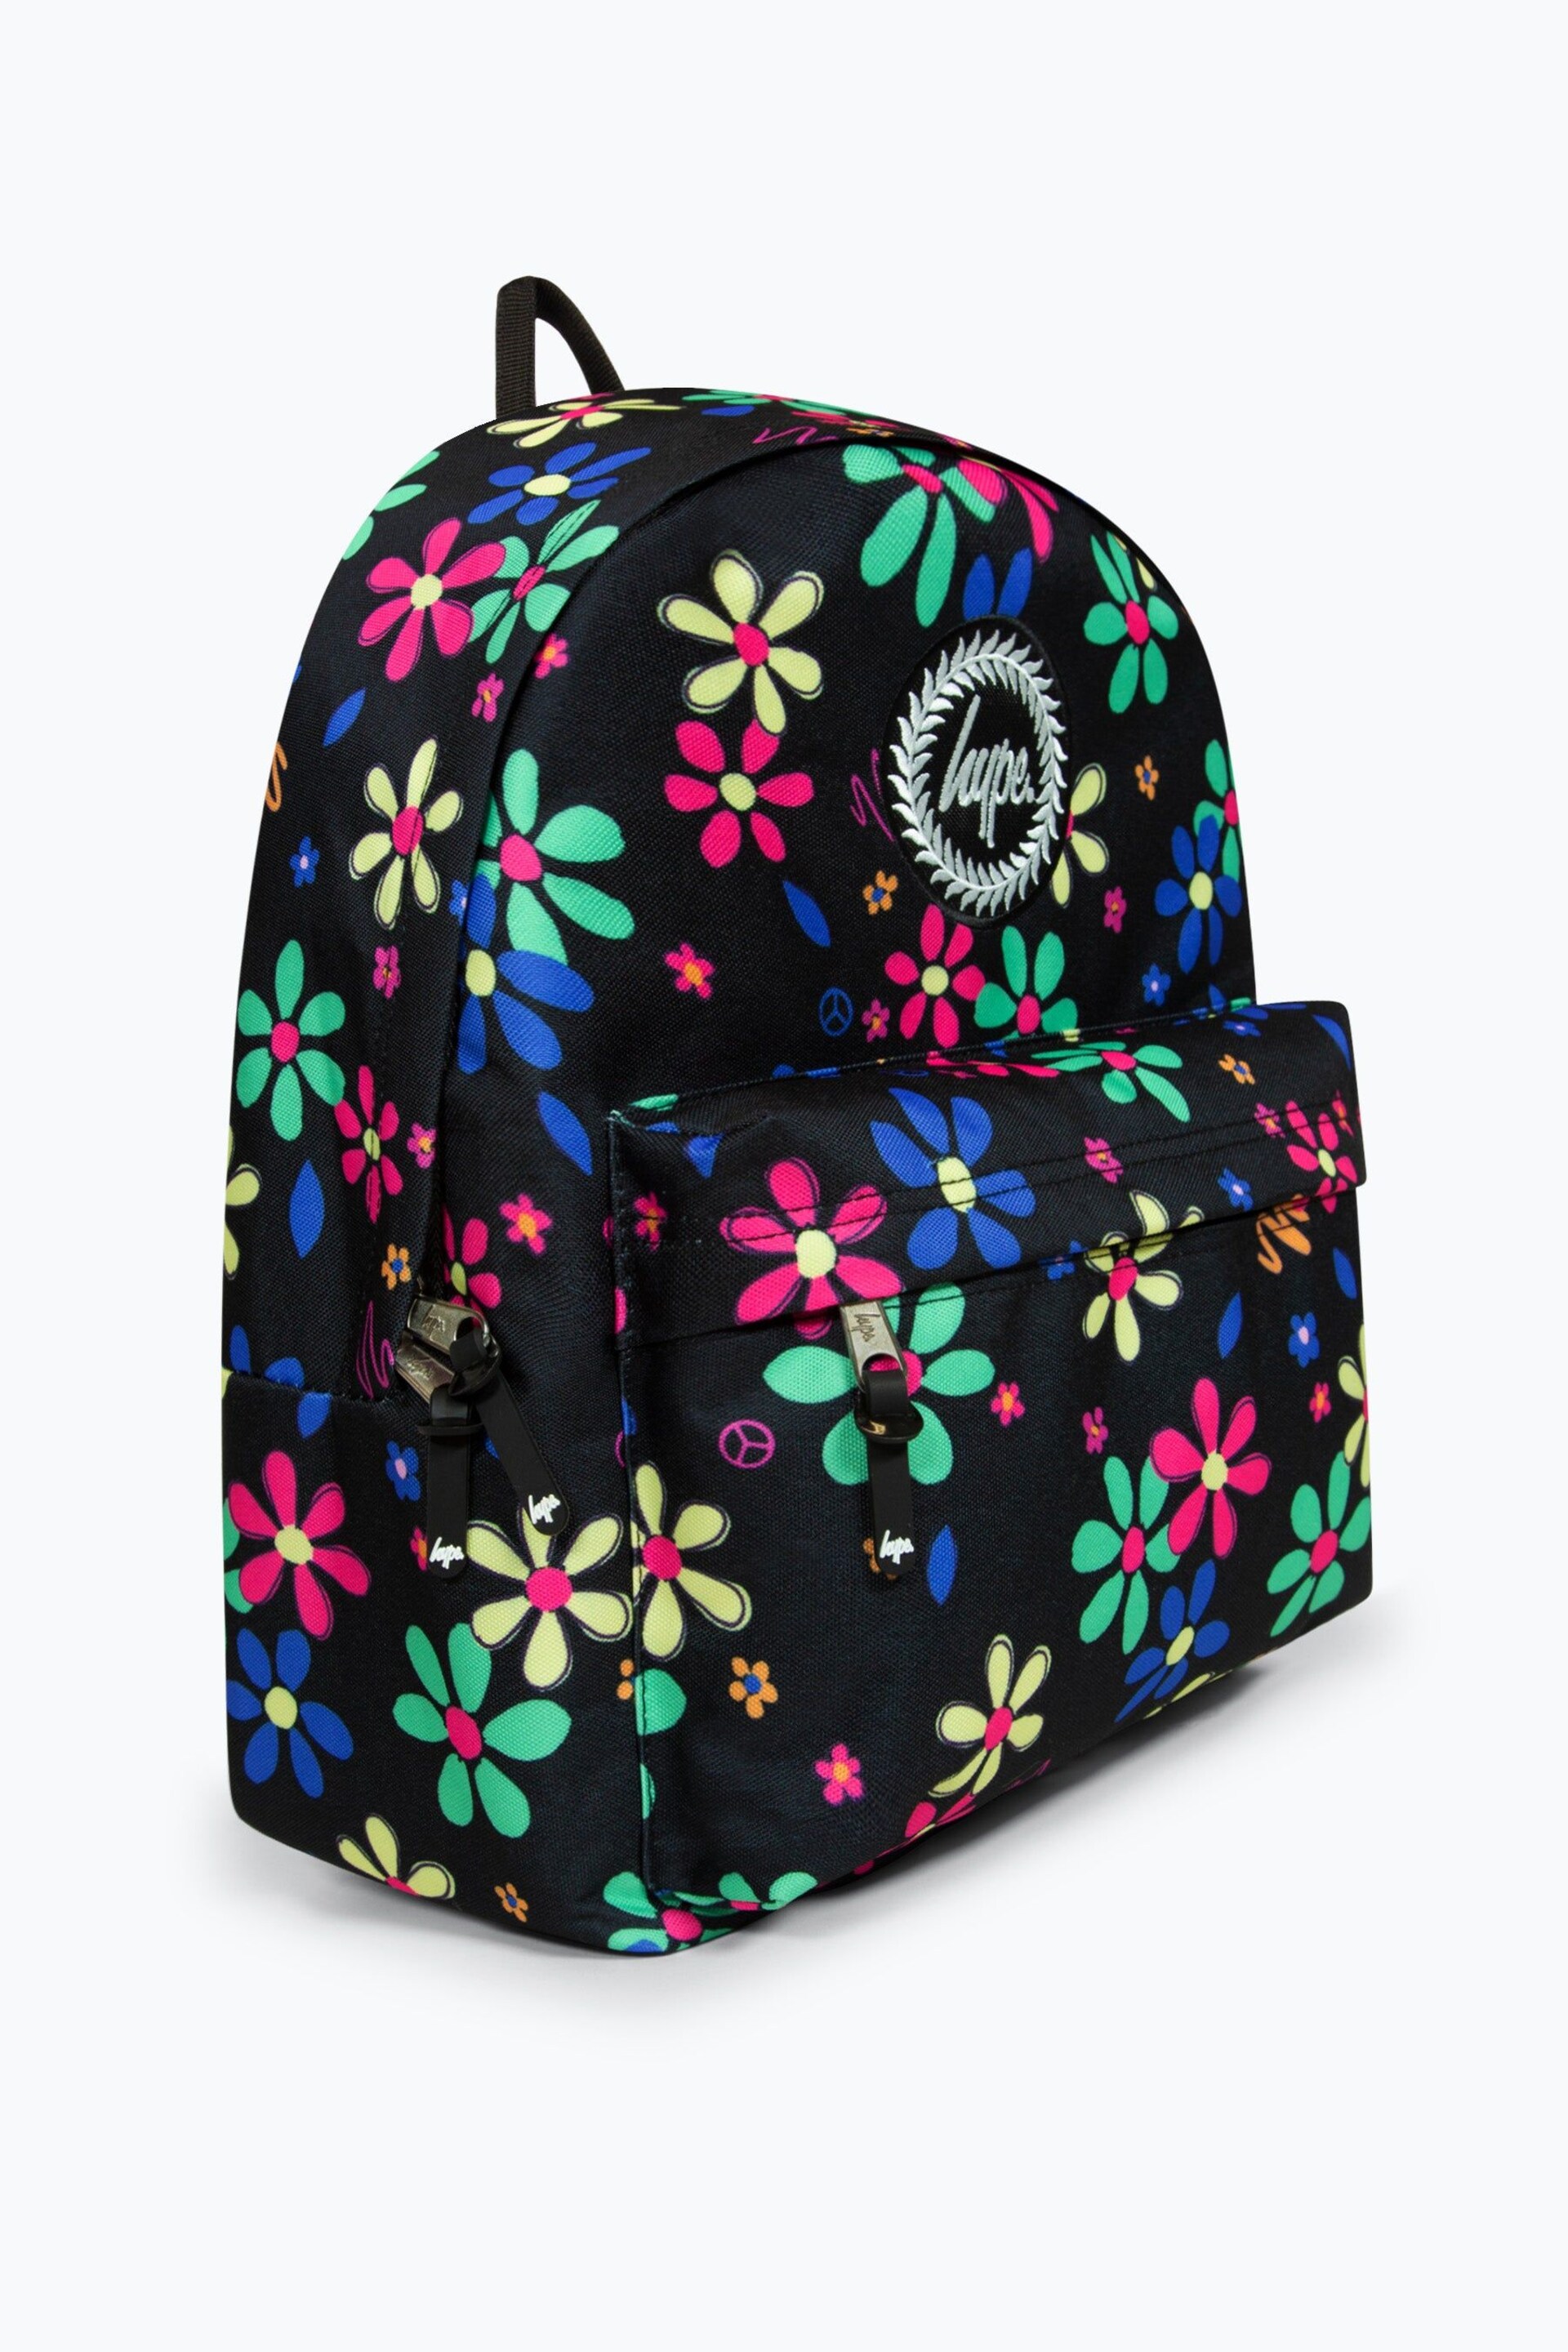 Hype. Hand Drawn Floral Backpack - Image 1 of 11